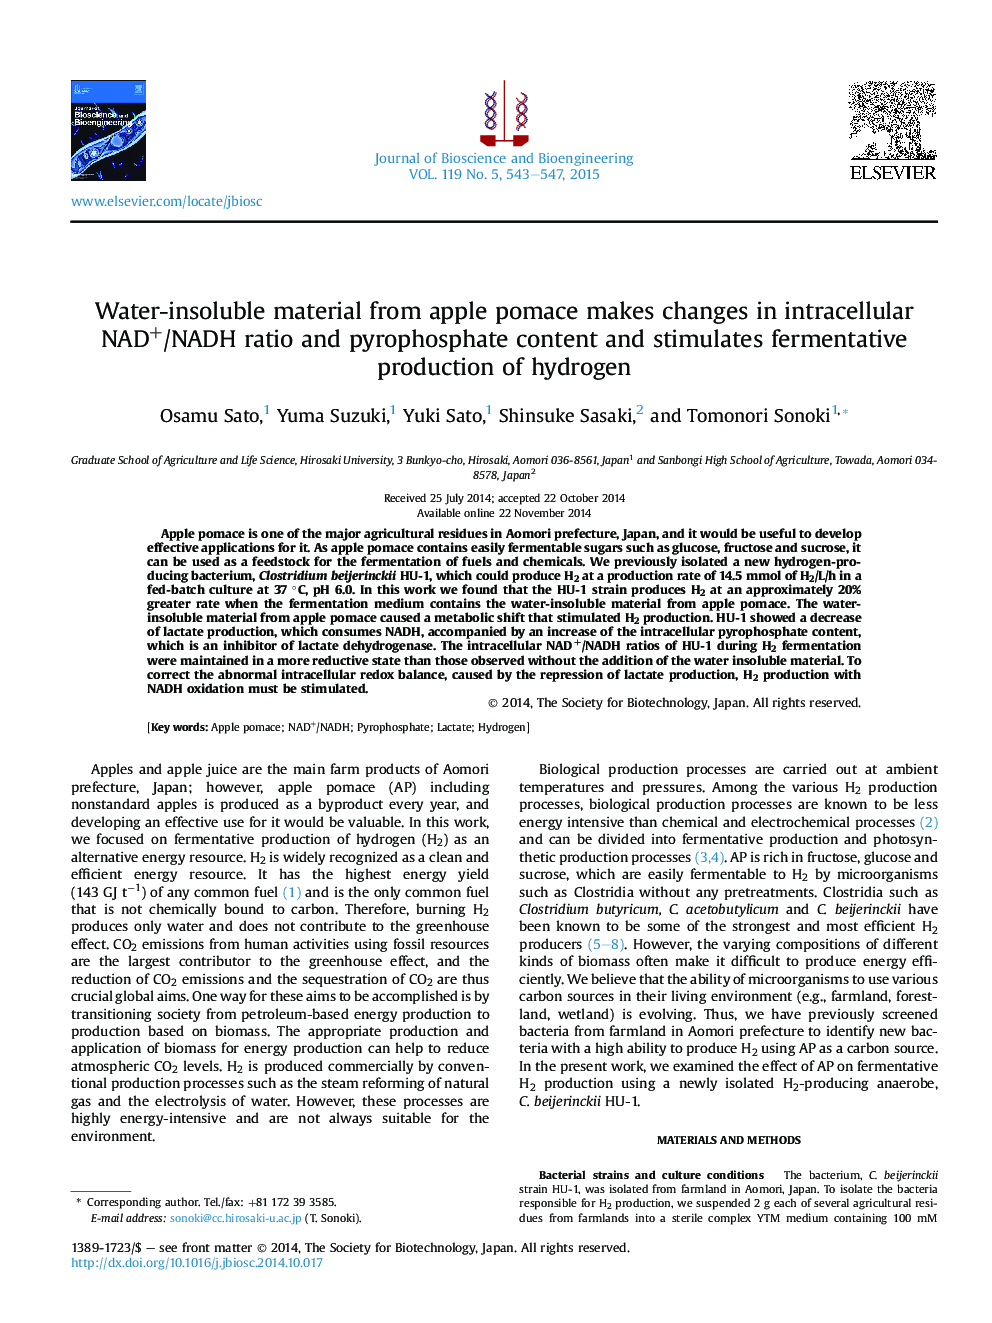 Water-insoluble material from apple pomace makes changes in intracellular NAD+/NADH ratio and pyrophosphate content and stimulates fermentative production of hydrogen